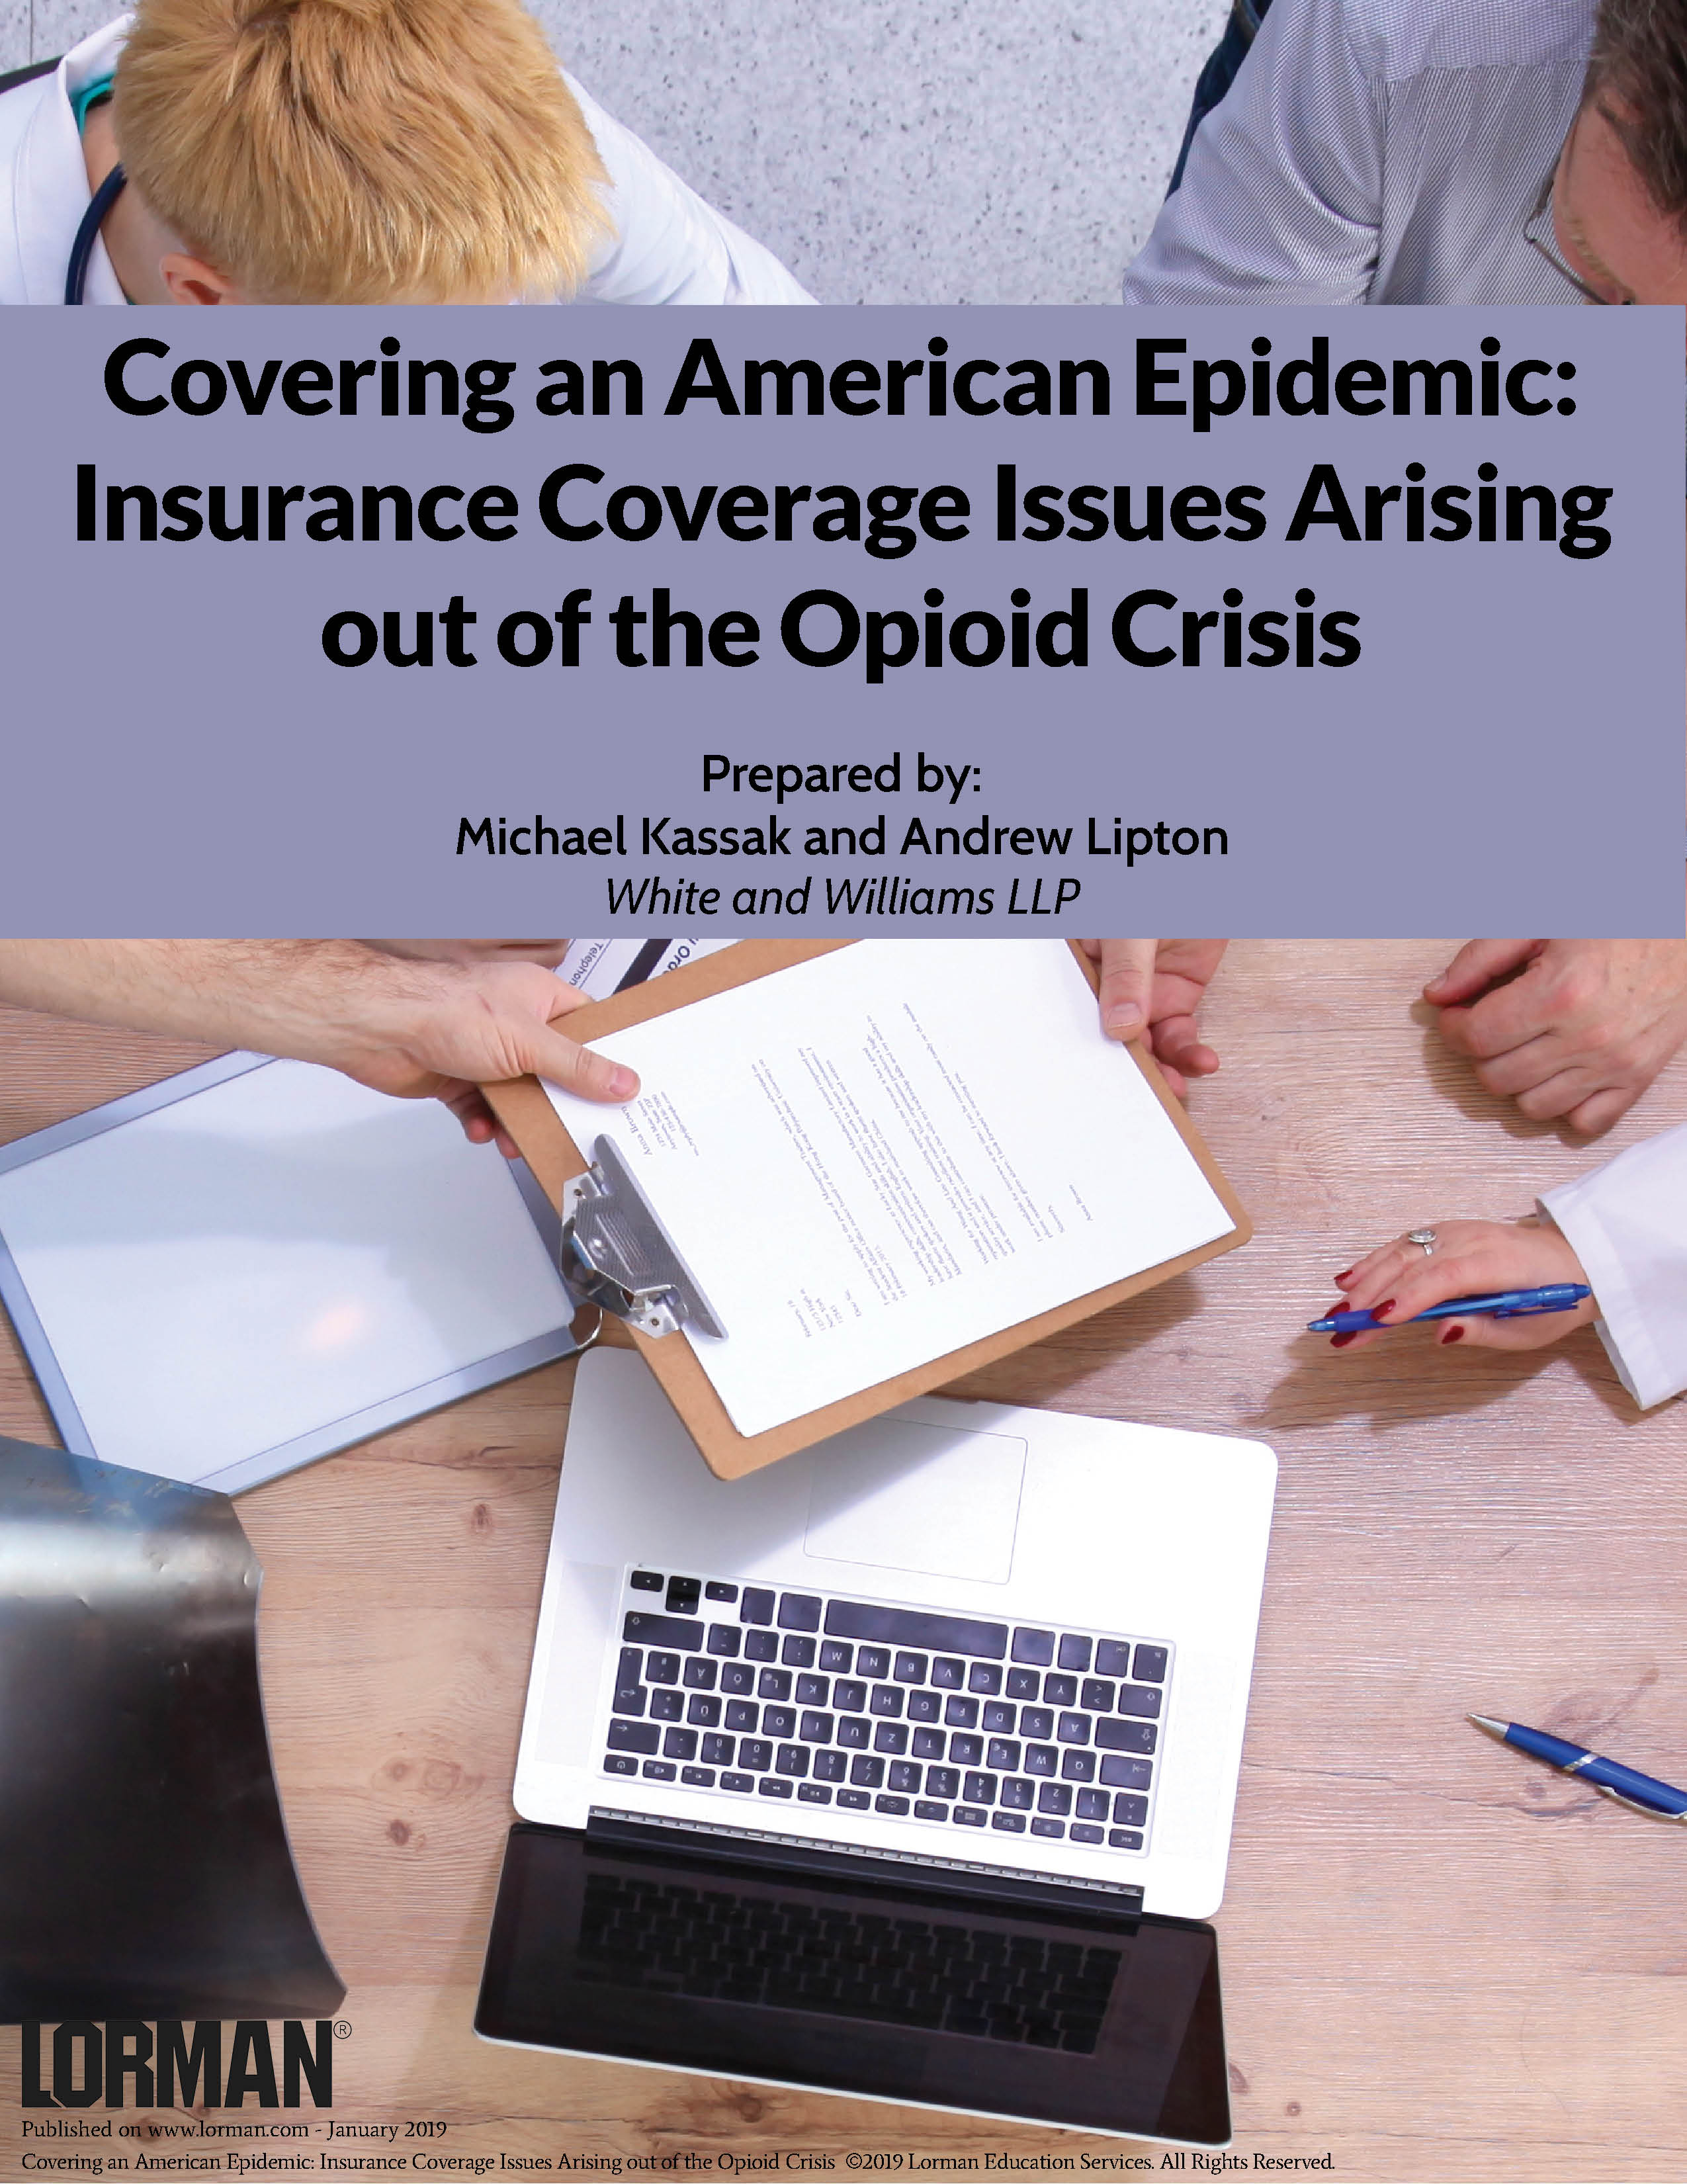 Covering an American Epidemic: Insurance Coverage Issues Arising out of the Opioid Crisis